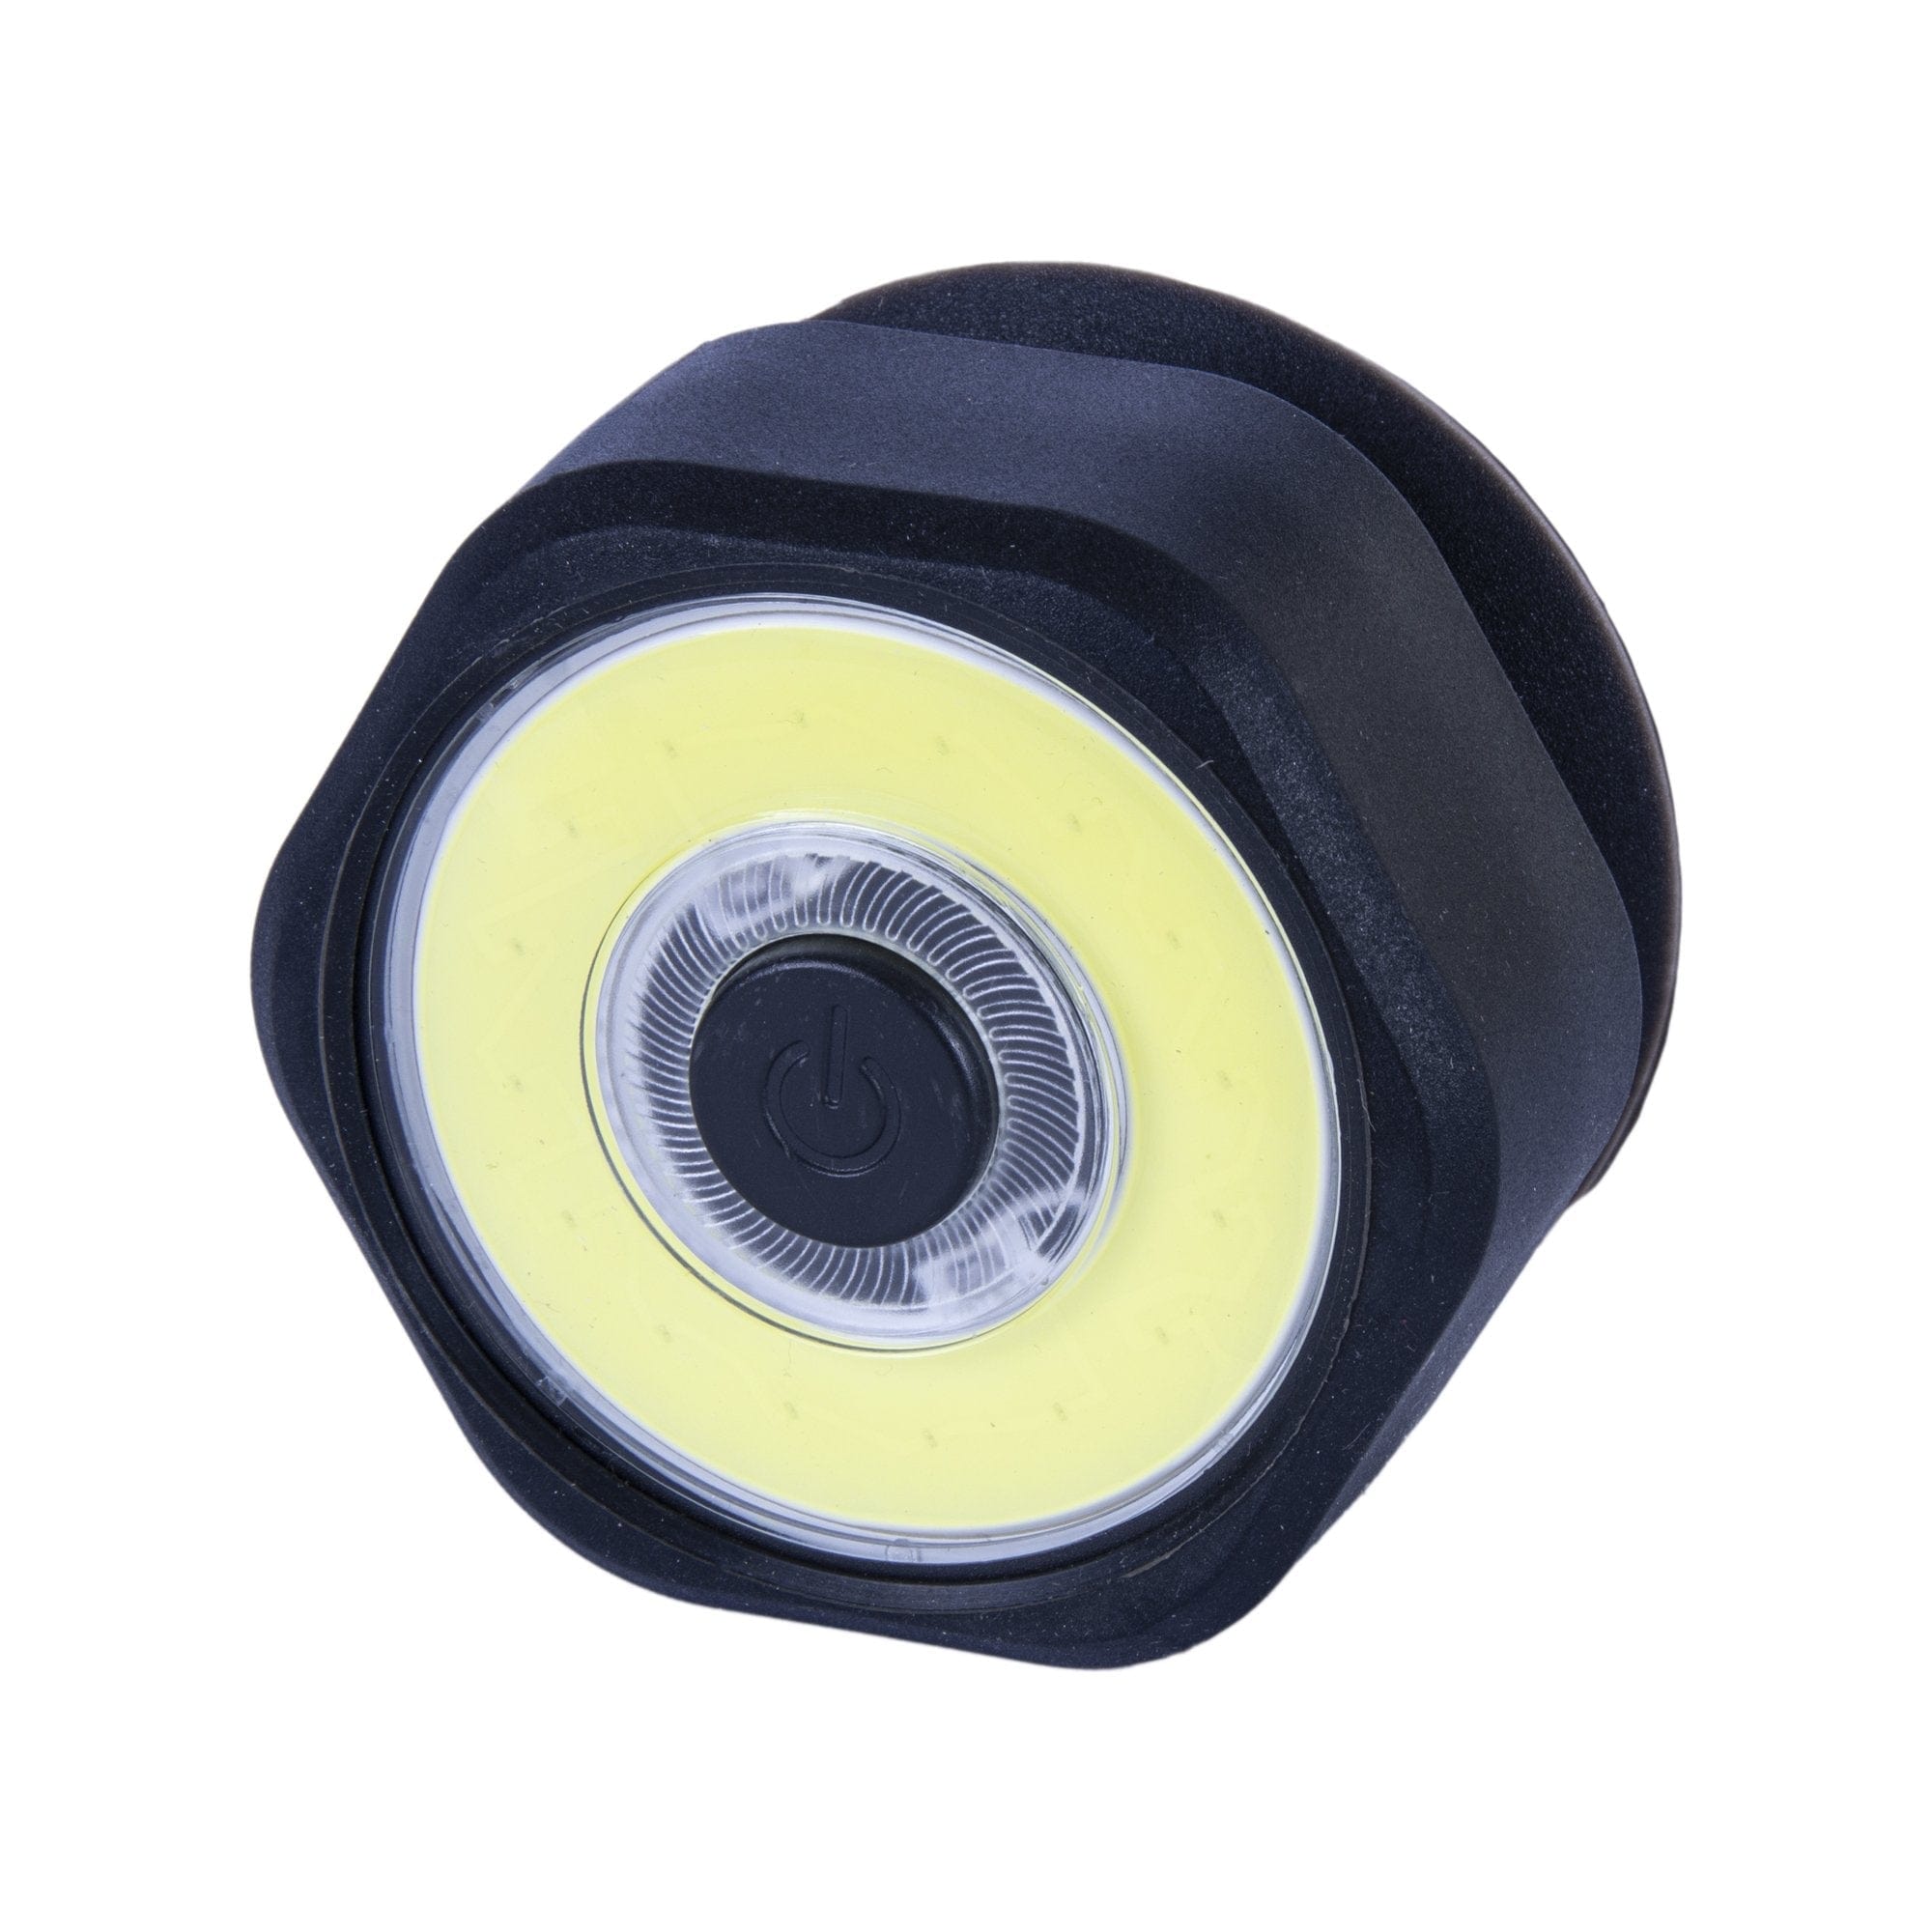 Brillar Electrical Suction Cup Worklight - Black